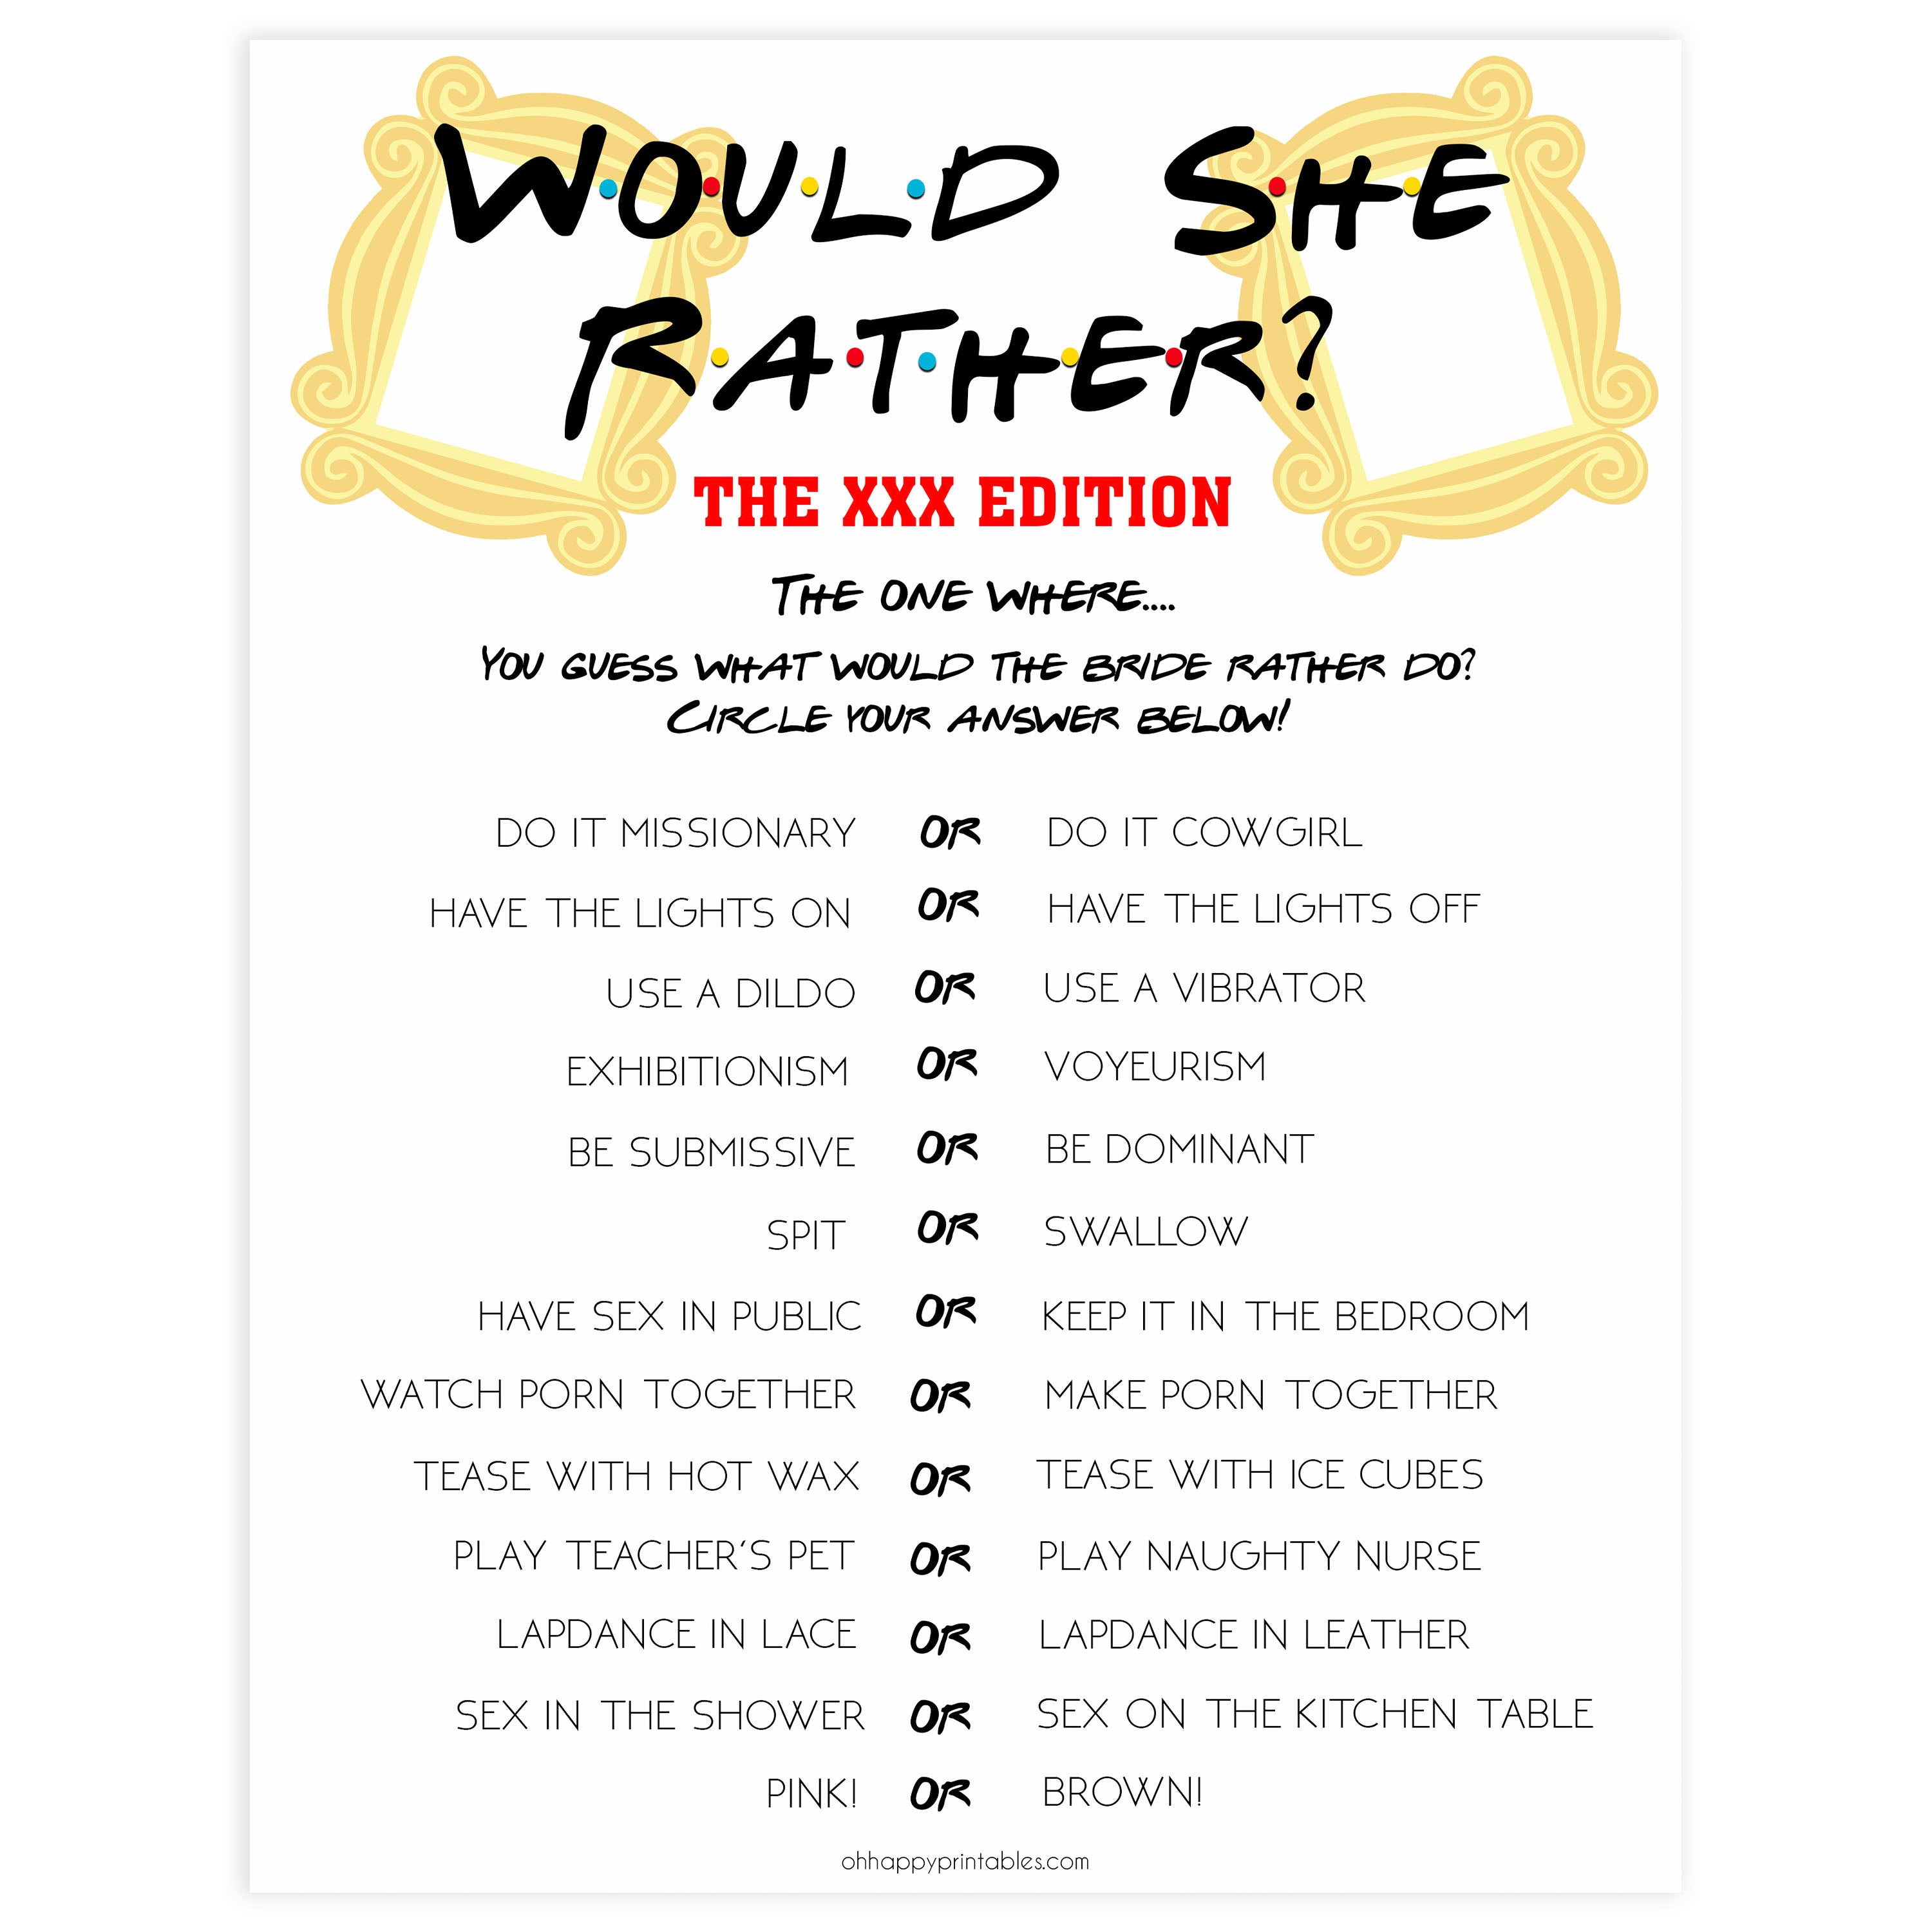 dirty would she rather, adult would she rather game, Printable bachelorette games, friends bachelorette, friends hen party games, fun hen party games, bachelorette game ideas, friends adult party games, naughty hen games, naughty bachelorette games